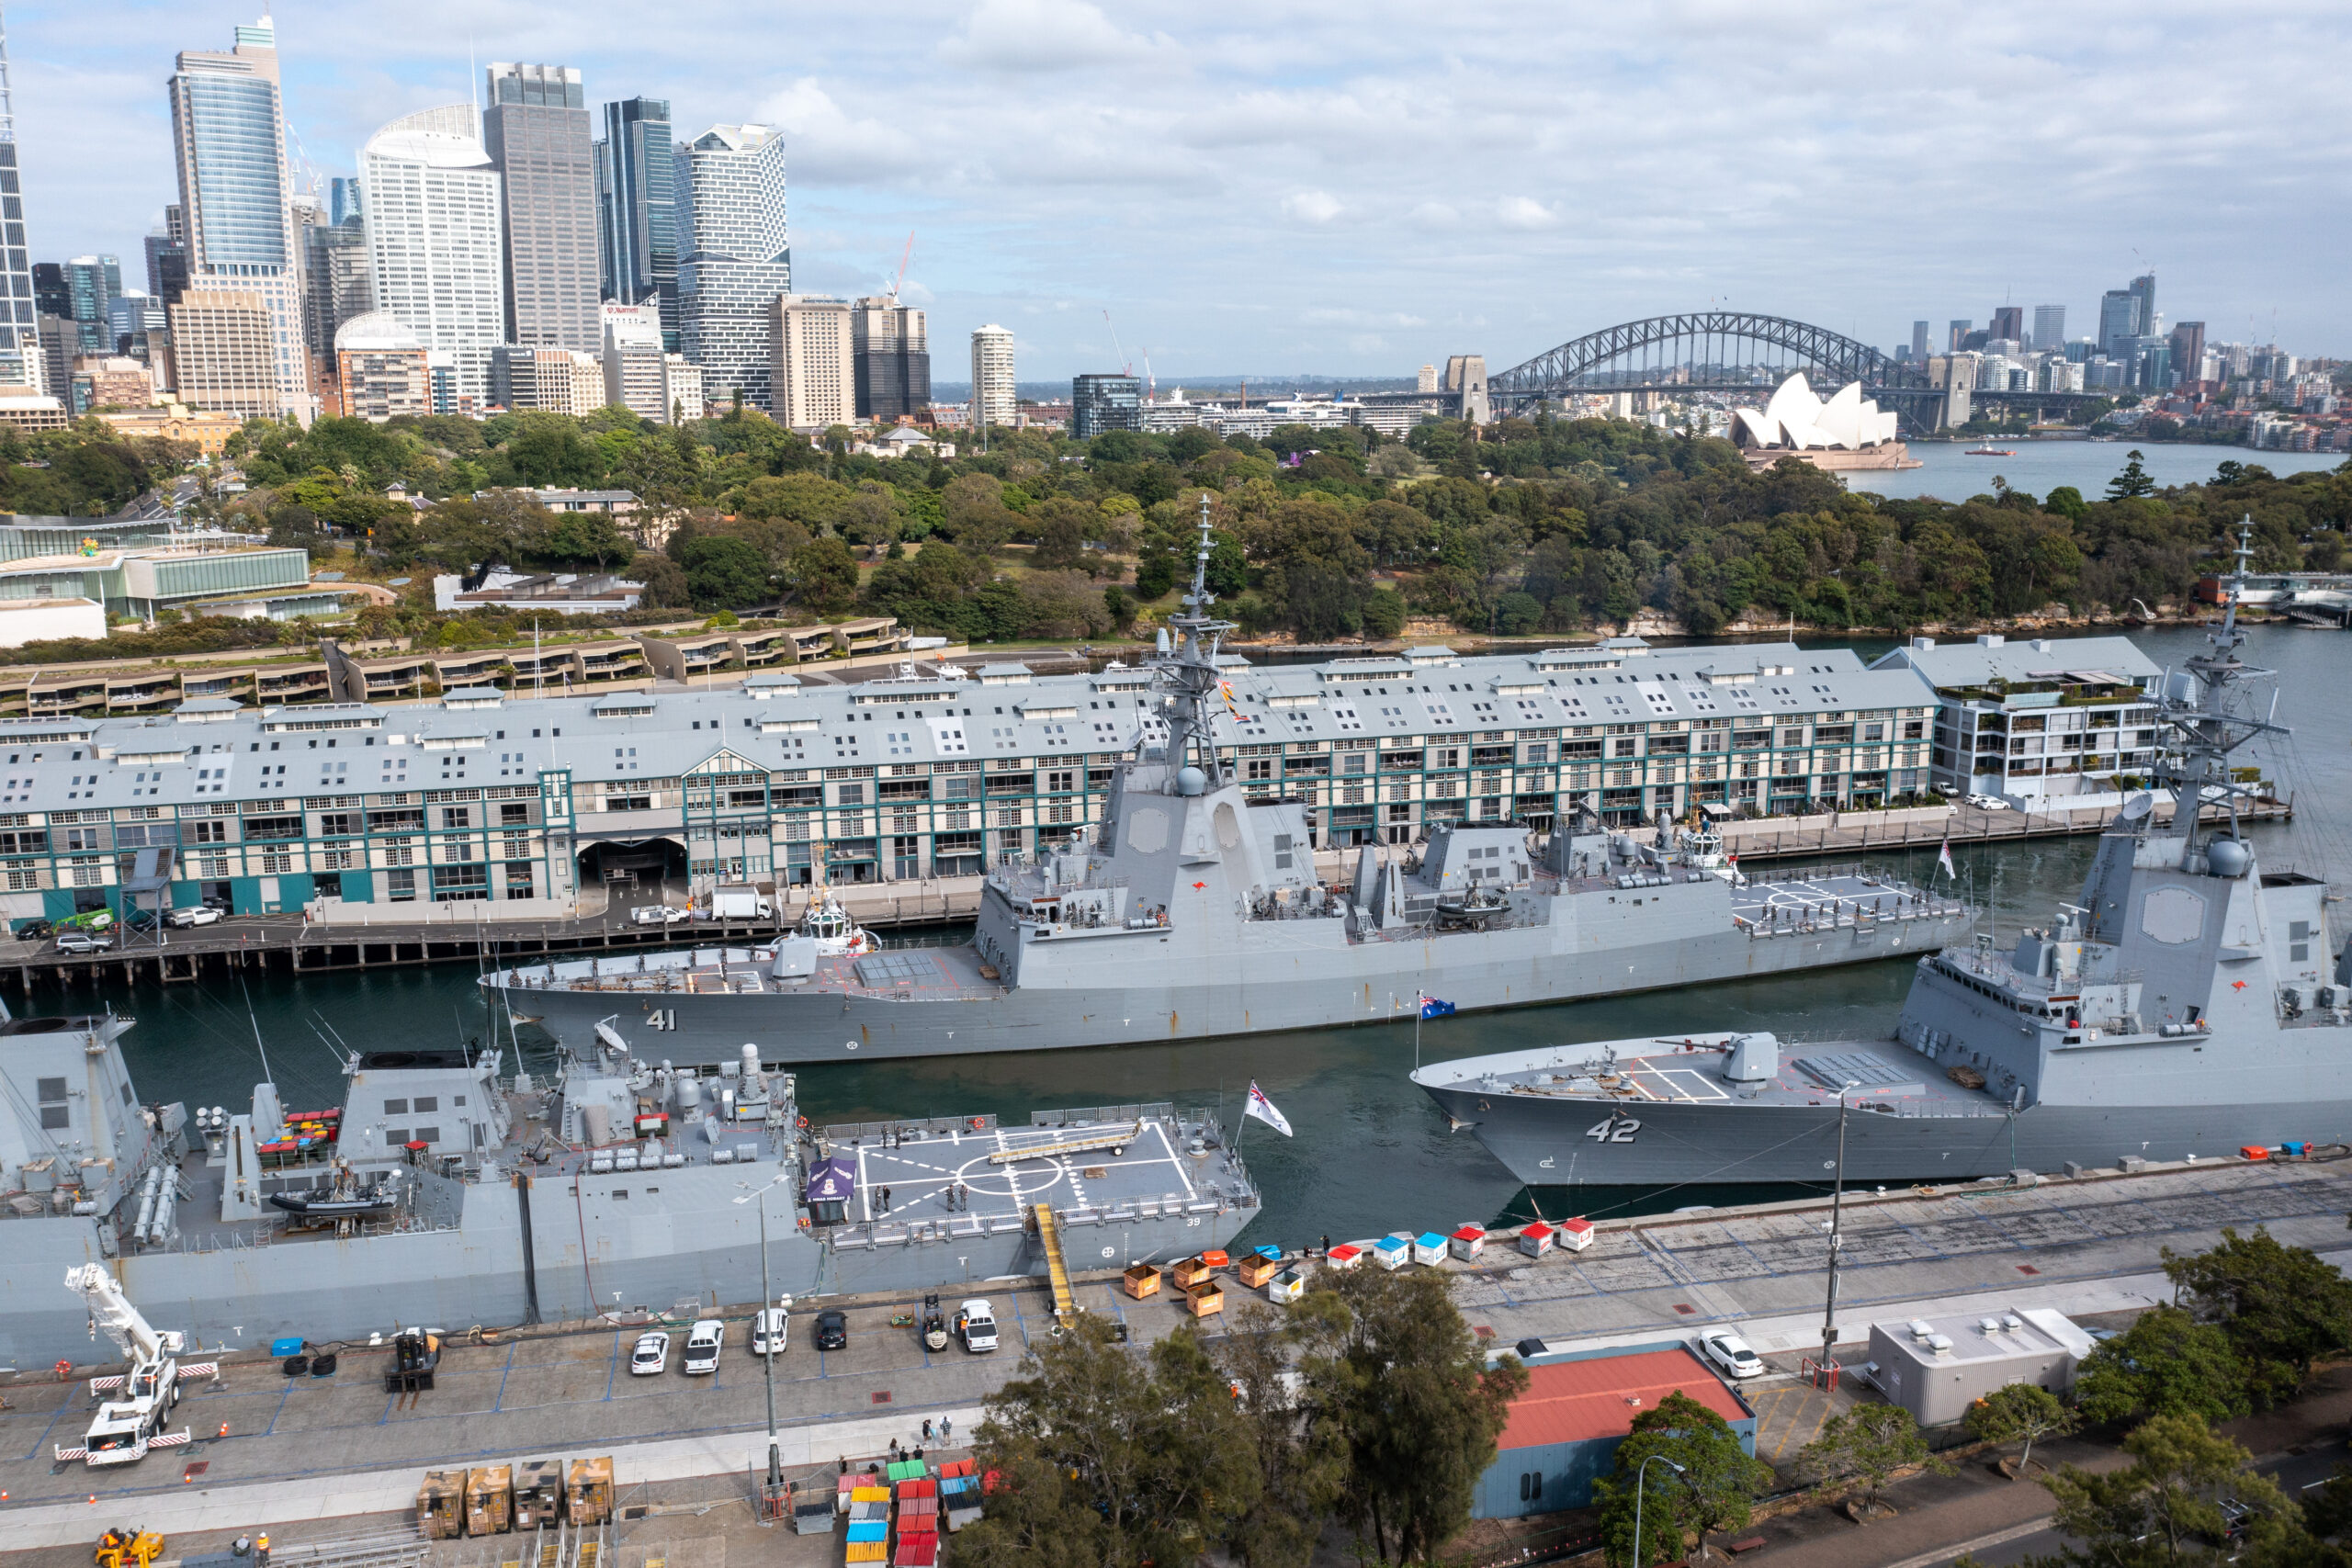 HMAS Brisbane returns home to Fleet Base East in Sydney. *** Local Caption *** HMAS Brisbane returned to Fleet Base East, Sydney on Tuesday 20 December 2022.The ship and its crew were deployed for two months, visiting overseas ports in New Caledonia and Hawaii as well as conducting Exercise Pacific Edge.